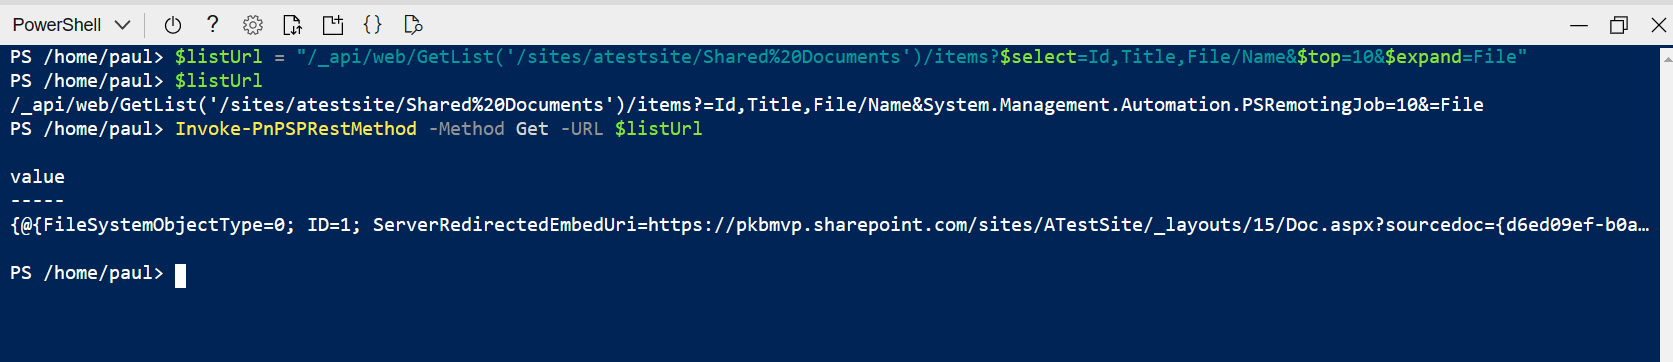 Screenshot of the output of Azure Shell with a malformed url